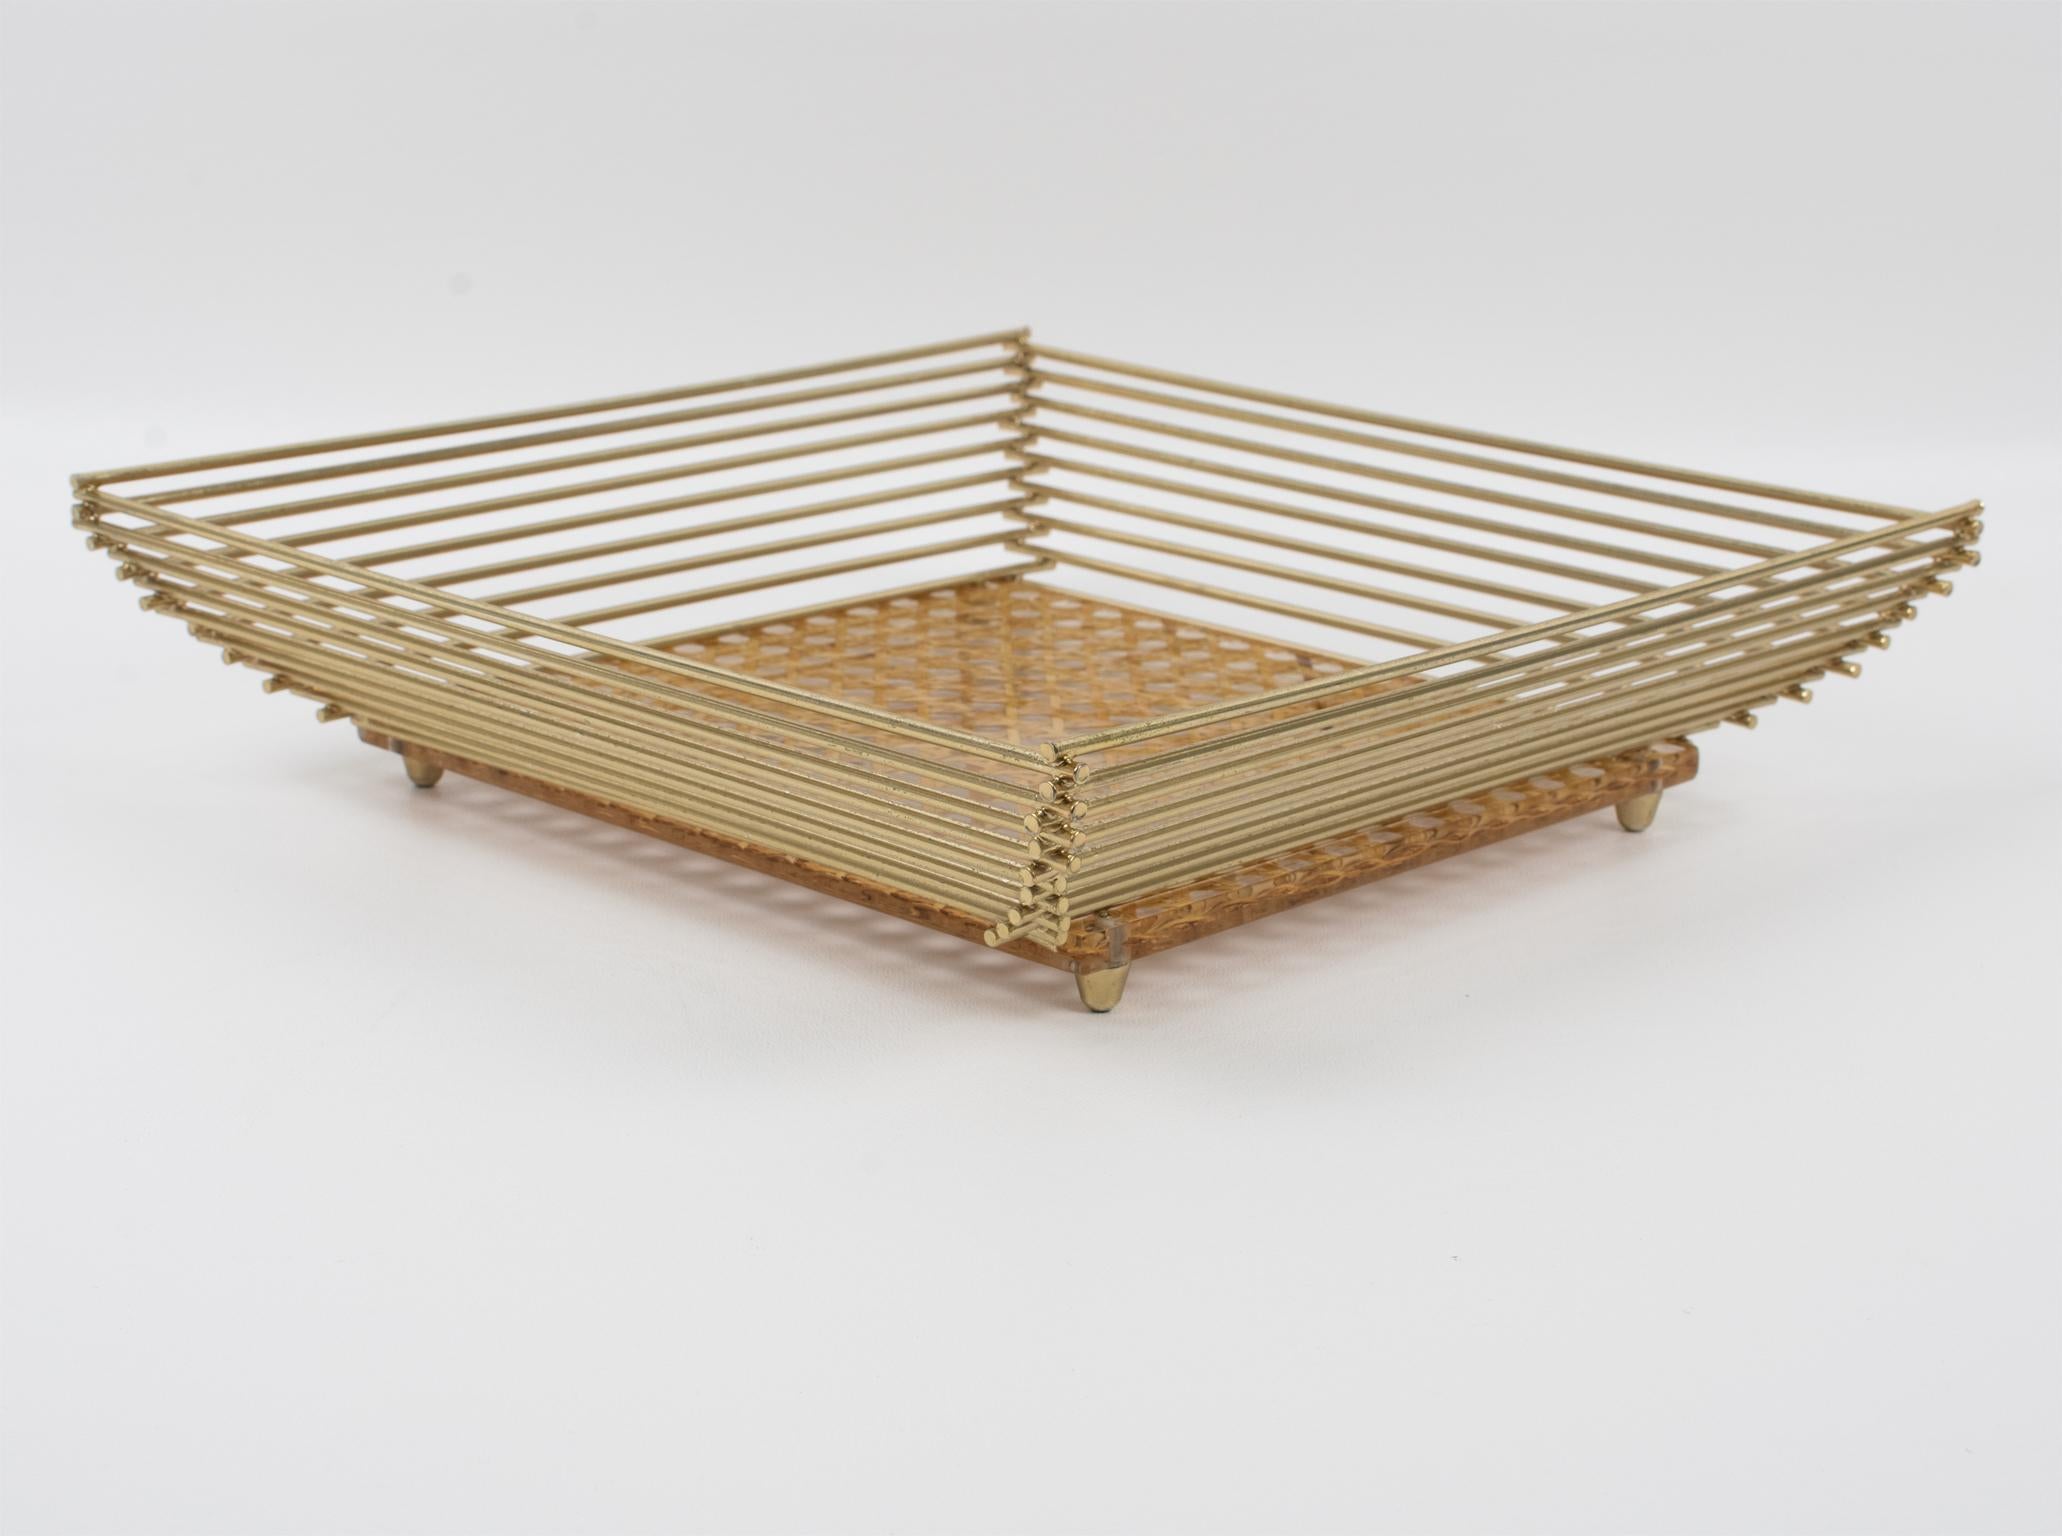 Lucite, Rattan or Wicker and Brass Barware Serving Tray, Italy 1970s For Sale 2